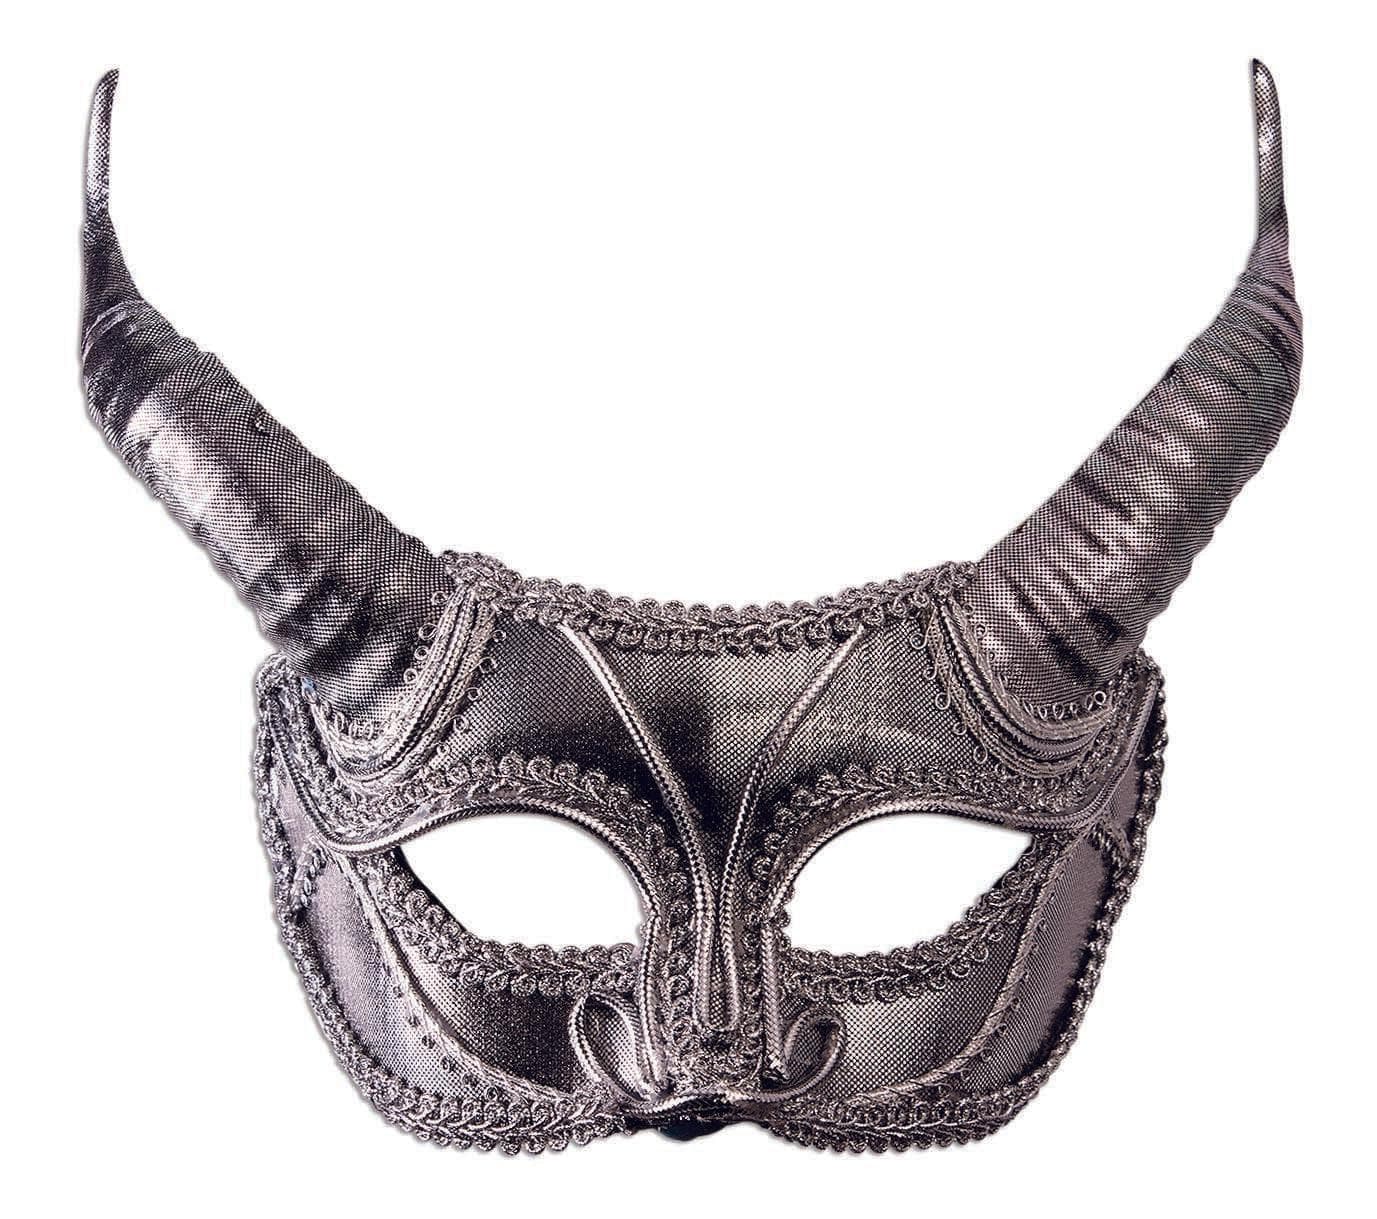 Silver Mask with Horns - costumes.com